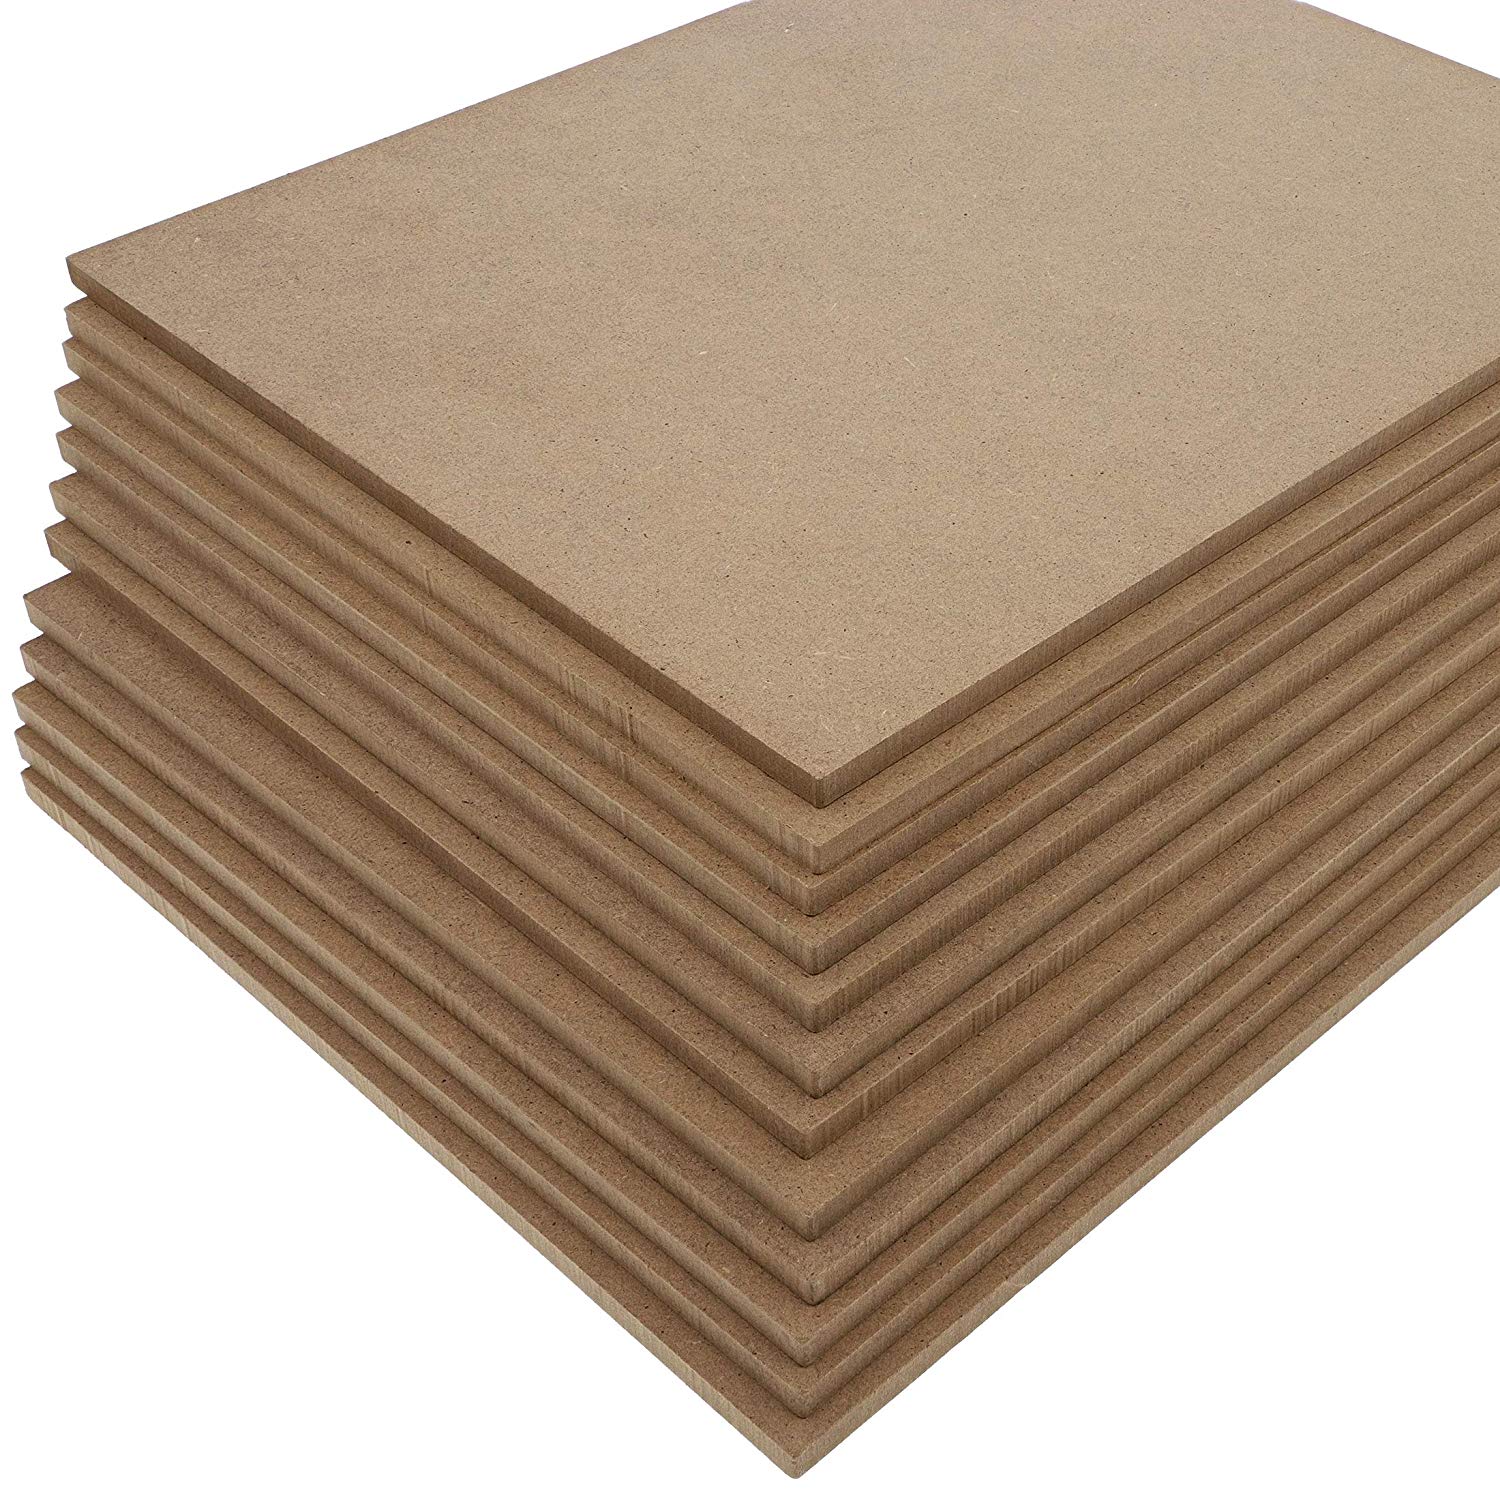 0.25 Thick Blank MDF Chipboard Sheets for Painting, Arts and Crafts (8 x 10 in, 12 Pack)